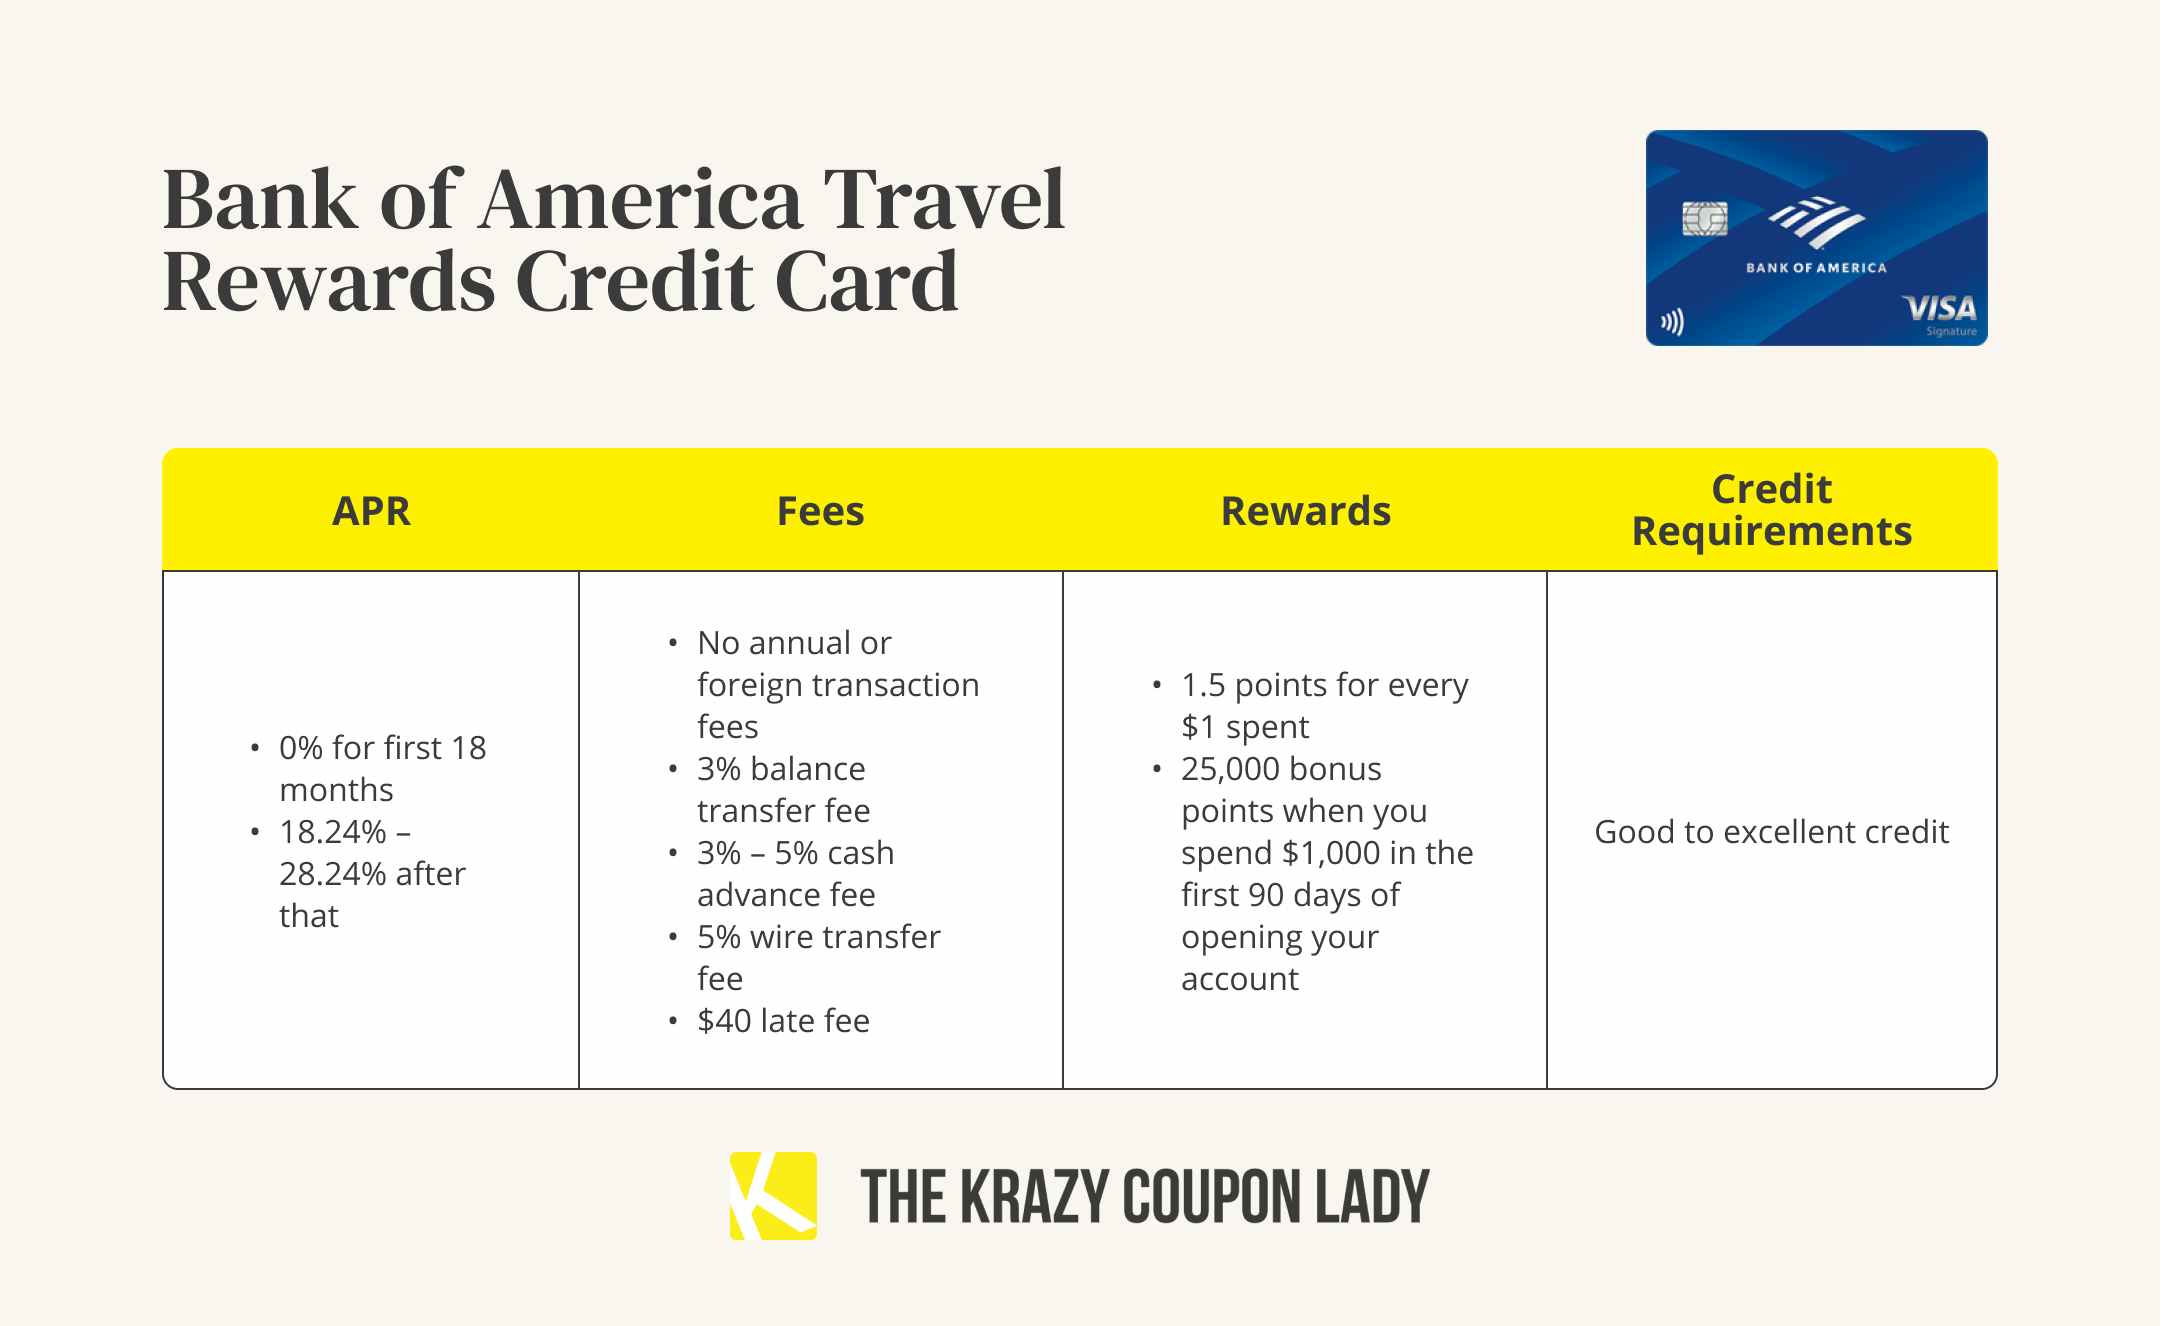 A graphic showing the APR, fees, rewards, and credit requirements for a Bank of America travel rewards credit card